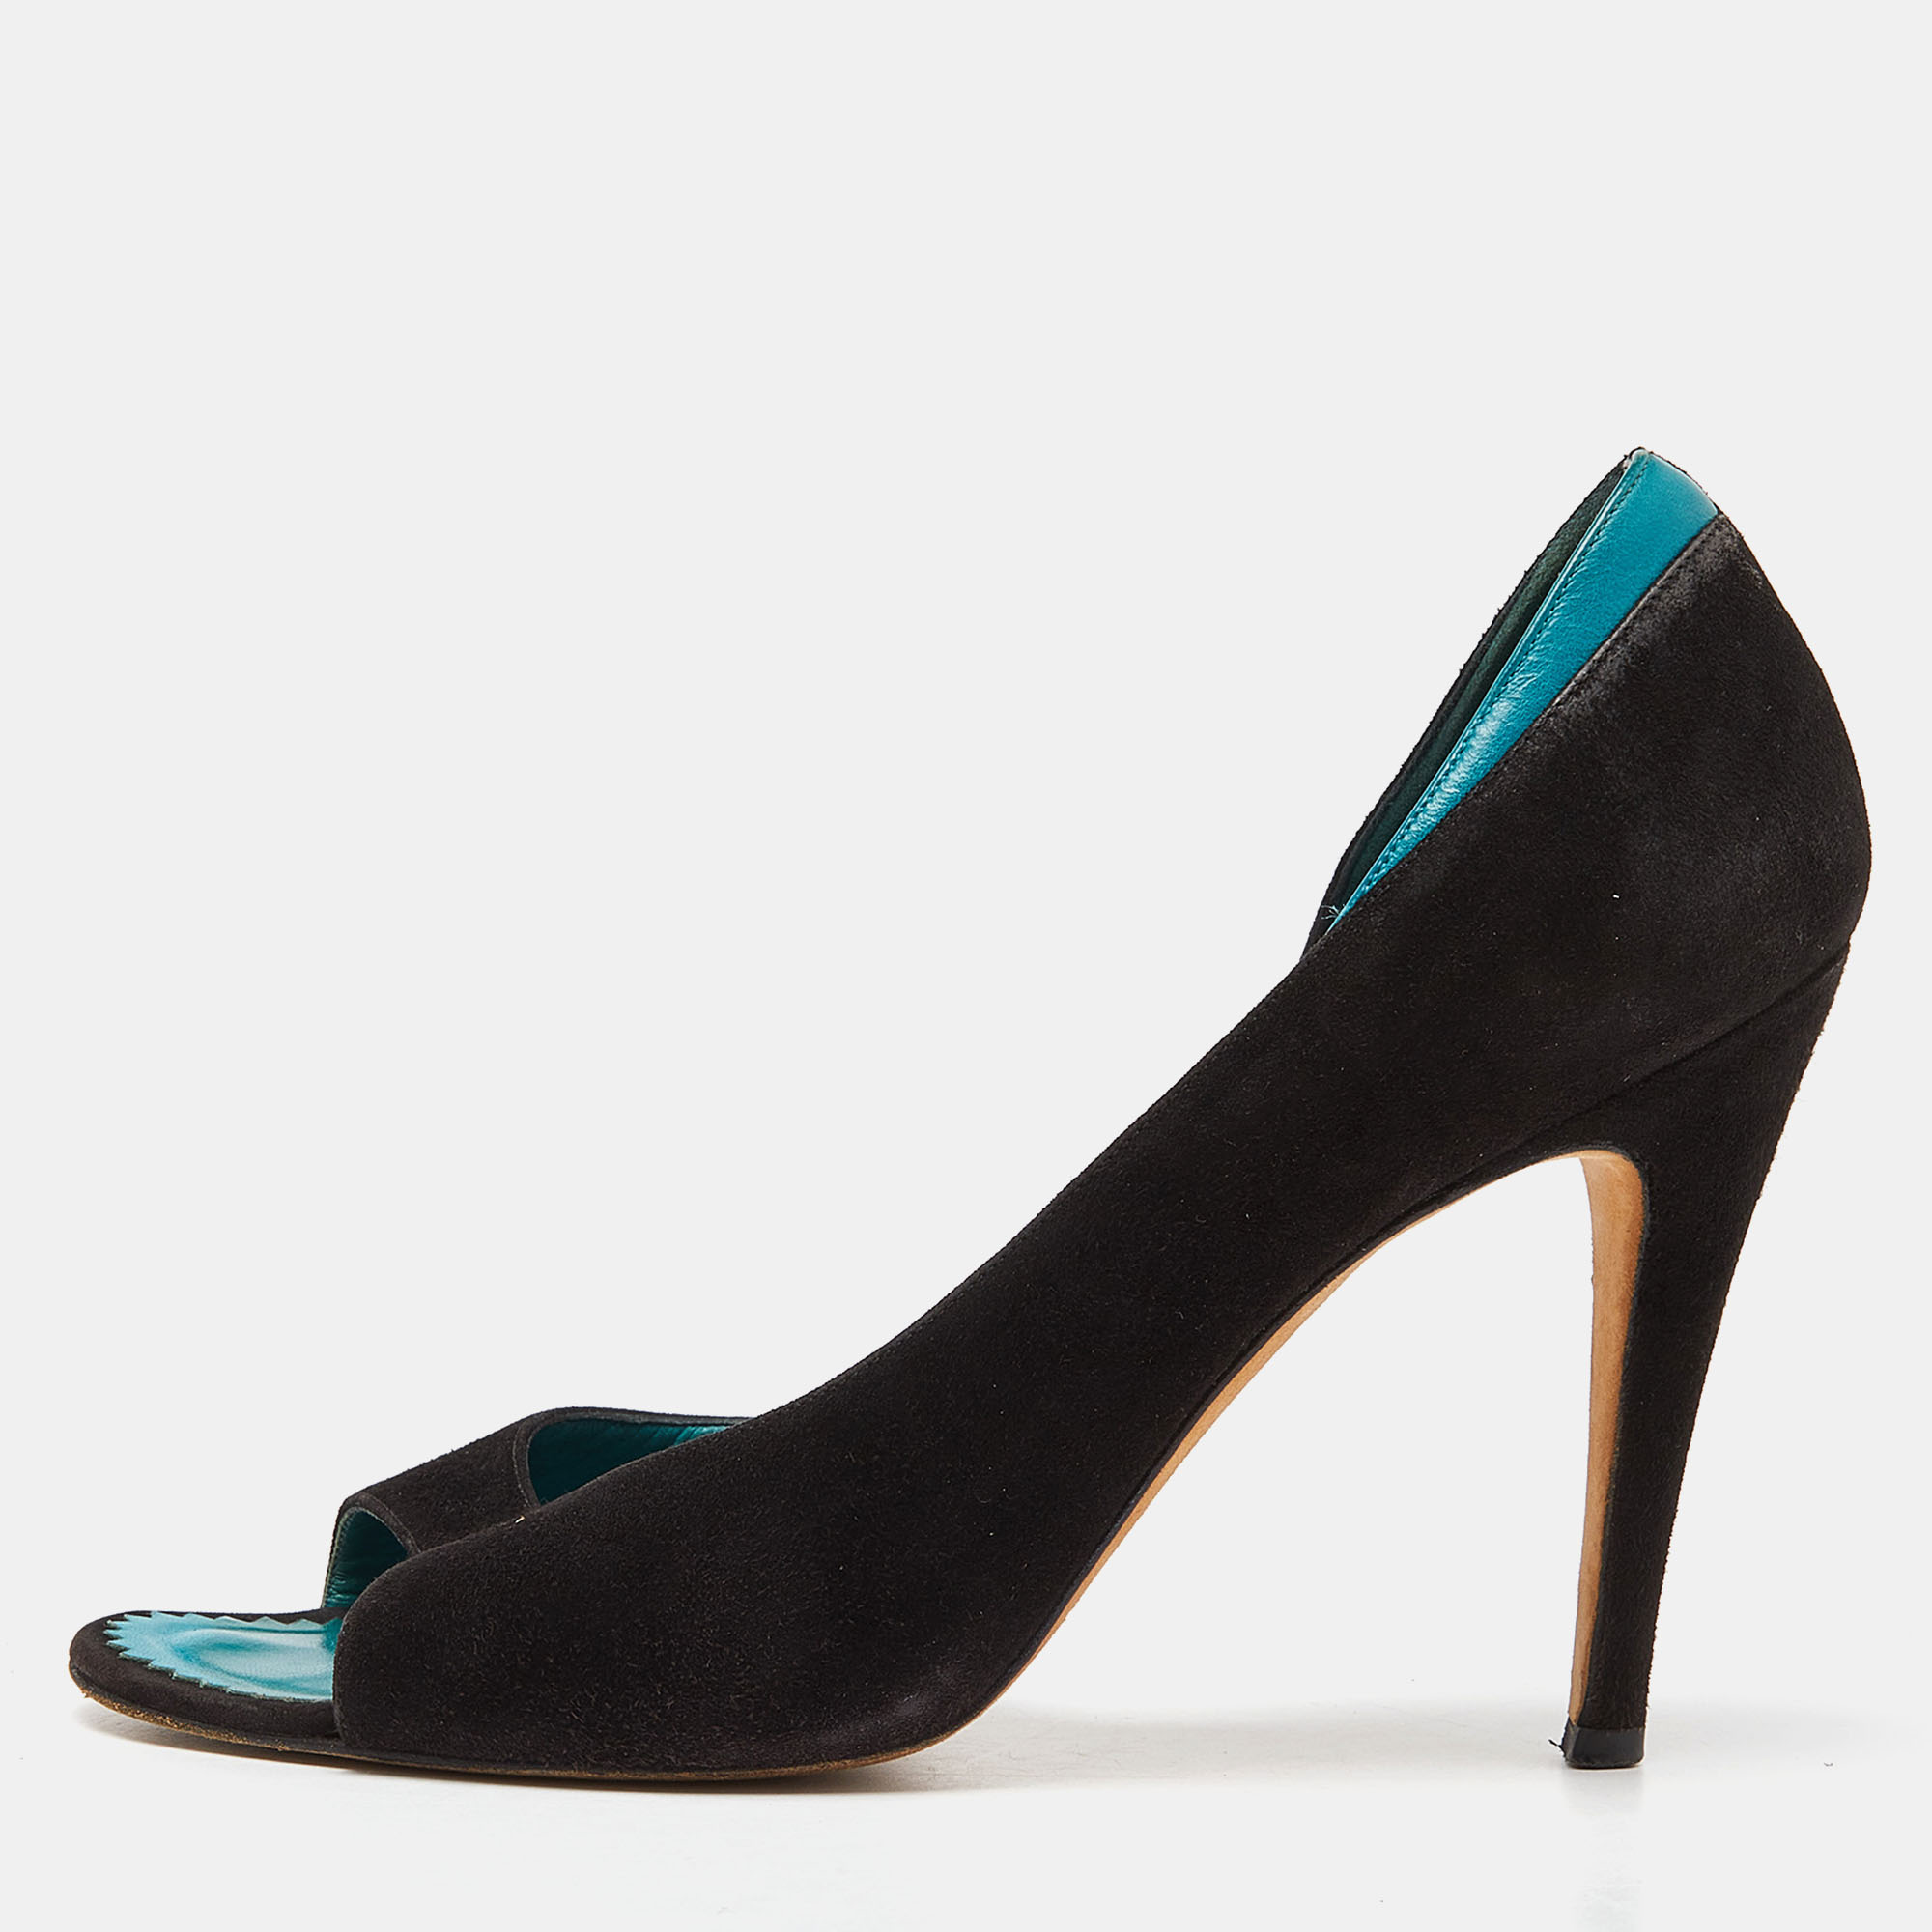 Every shoe collection needs a pair of pumps as sophisticated as this one. These Manolo Blahnik beauties have been created from suede and styled in d Orsay style with 11cm heels. The pumps are complete with peep toes and comfortable insoles.